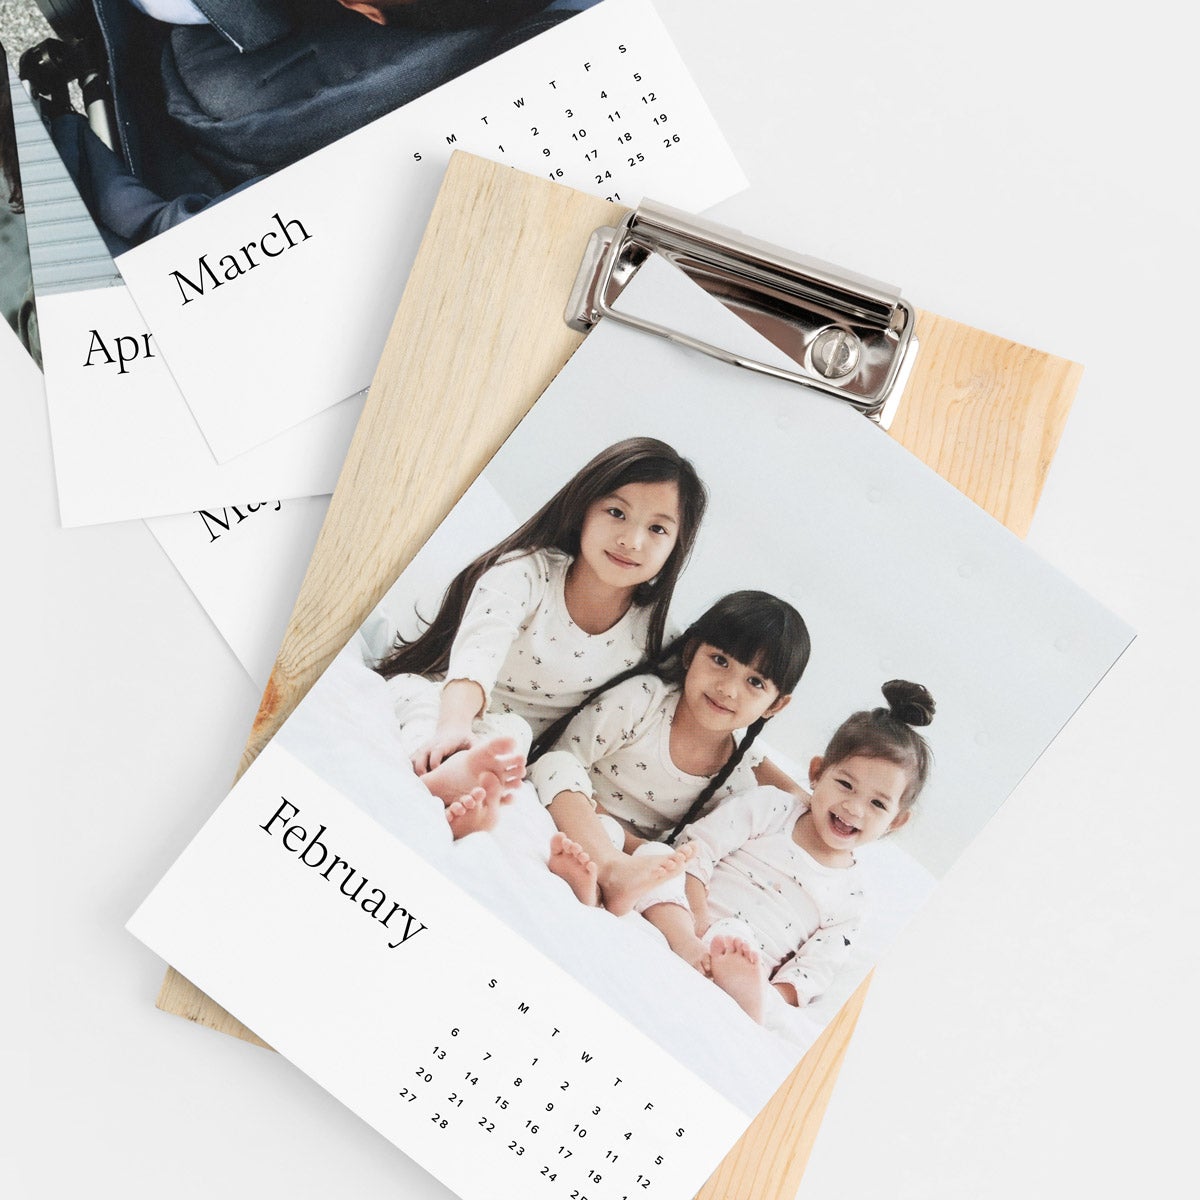 IDEAL FOR CHRISTMAS PRESENTS 2020/21 A4 PERSONALISED PHOTO CALENDARS 